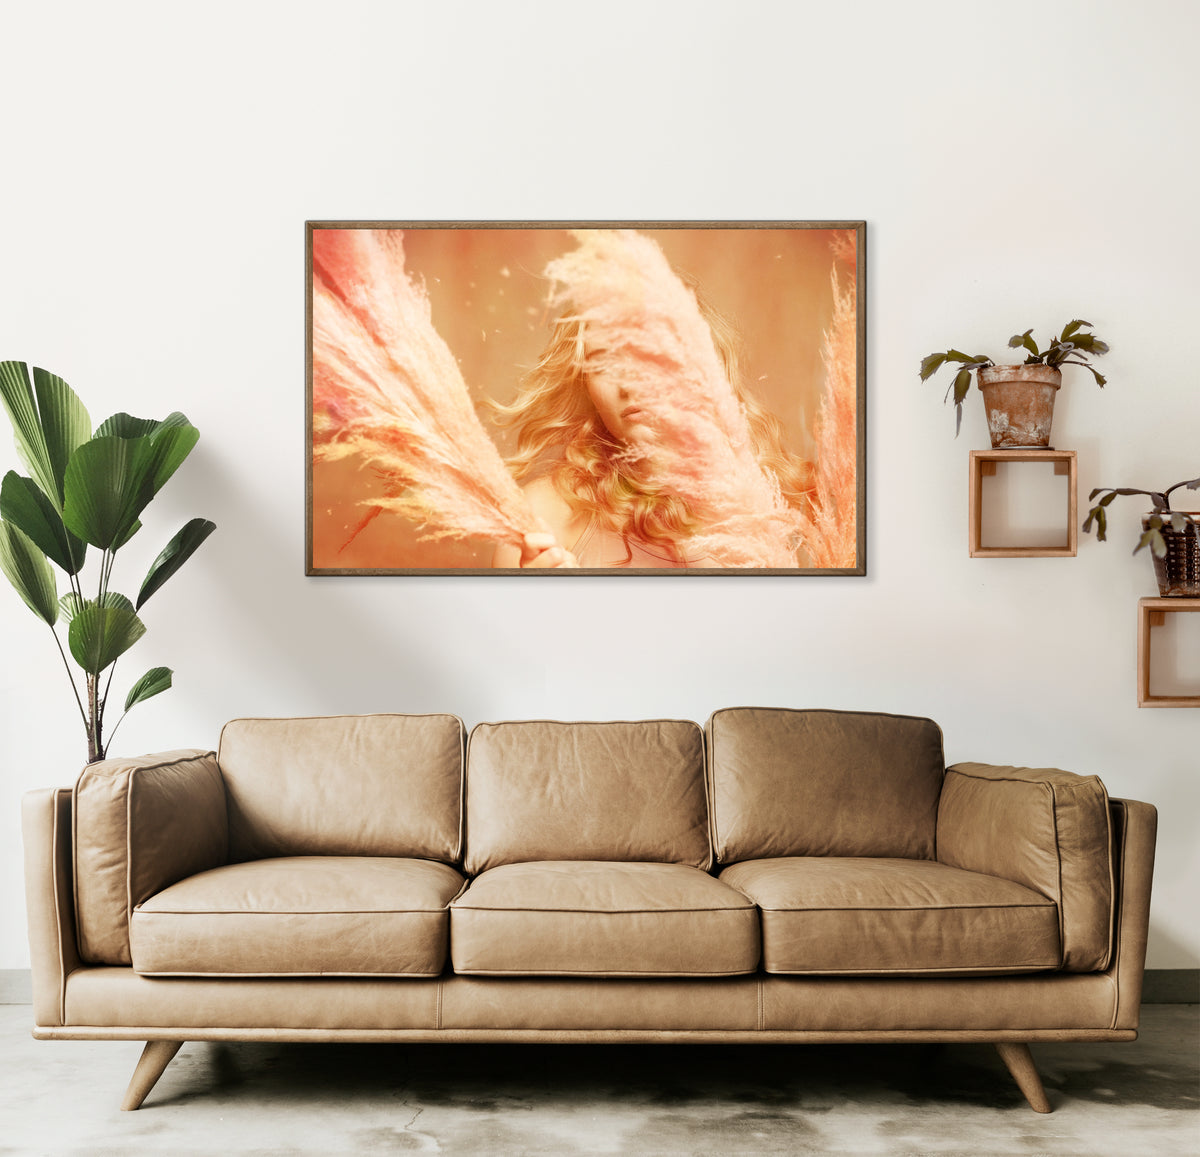 living room view with a framed image of Fine art print of a young blonde girl holding pink fluffy plumes